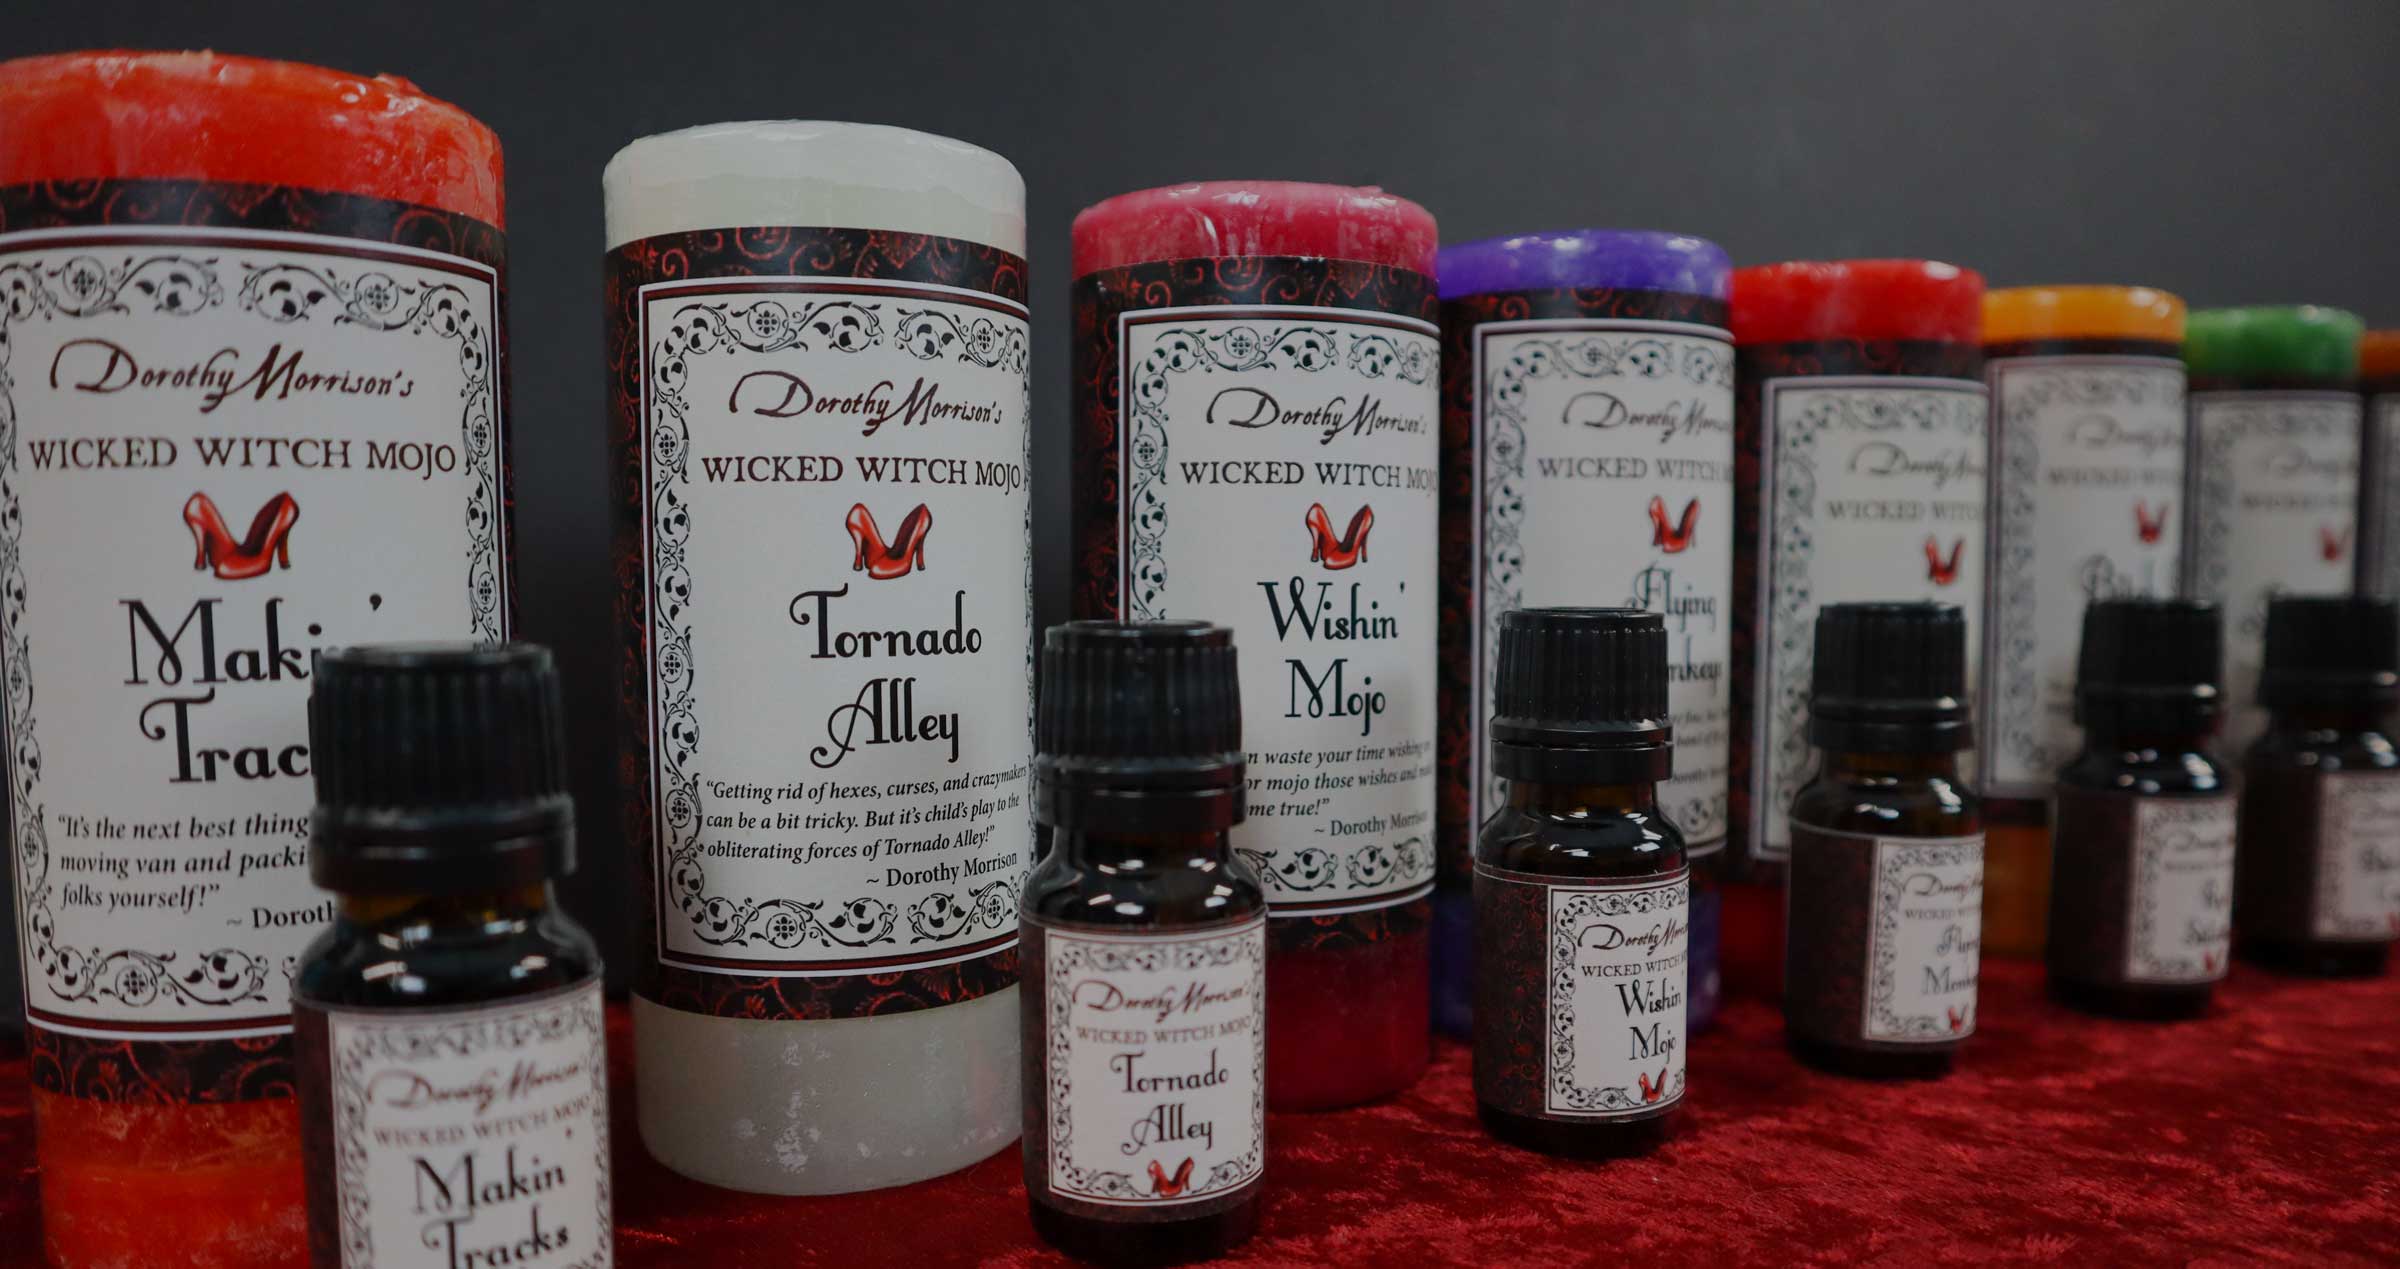 Coventry Creations and Dorothy Morrison’s Wicked Witch Mojo Candles and Oils